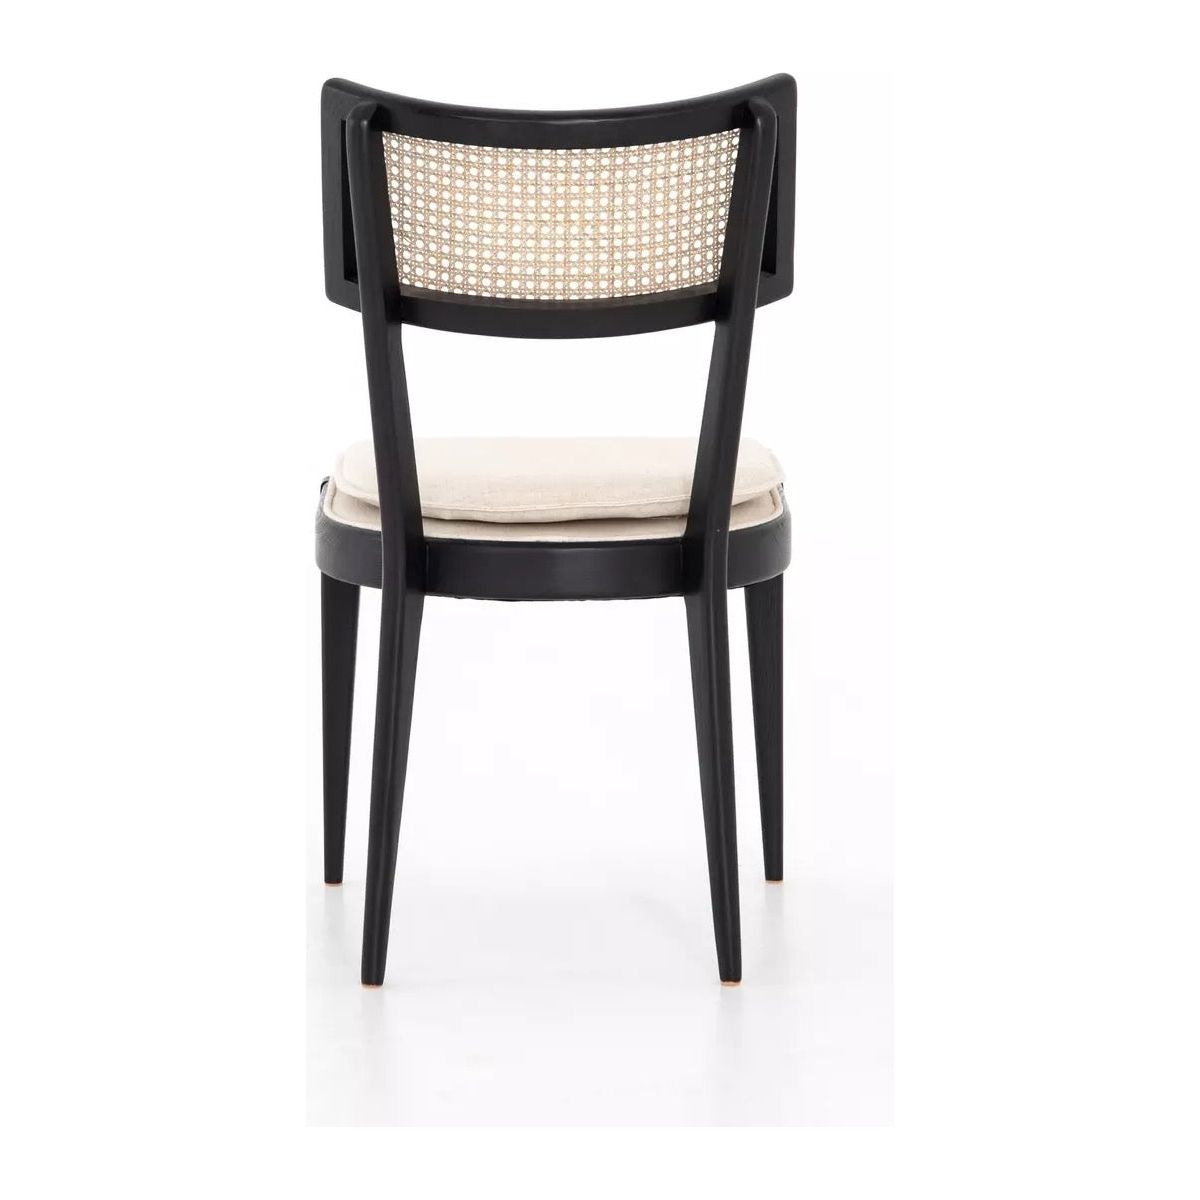 A Britt Dining Chair with an ebony-finished nettlewood frame, viewed from the back. The chair features a cane webbed backrest and a light beige cushioned seat made of high-performance linen-blend seating. The design is minimalist with four sleek, tapered legs, presenting a mix of modern and traditional styles. The background is white.